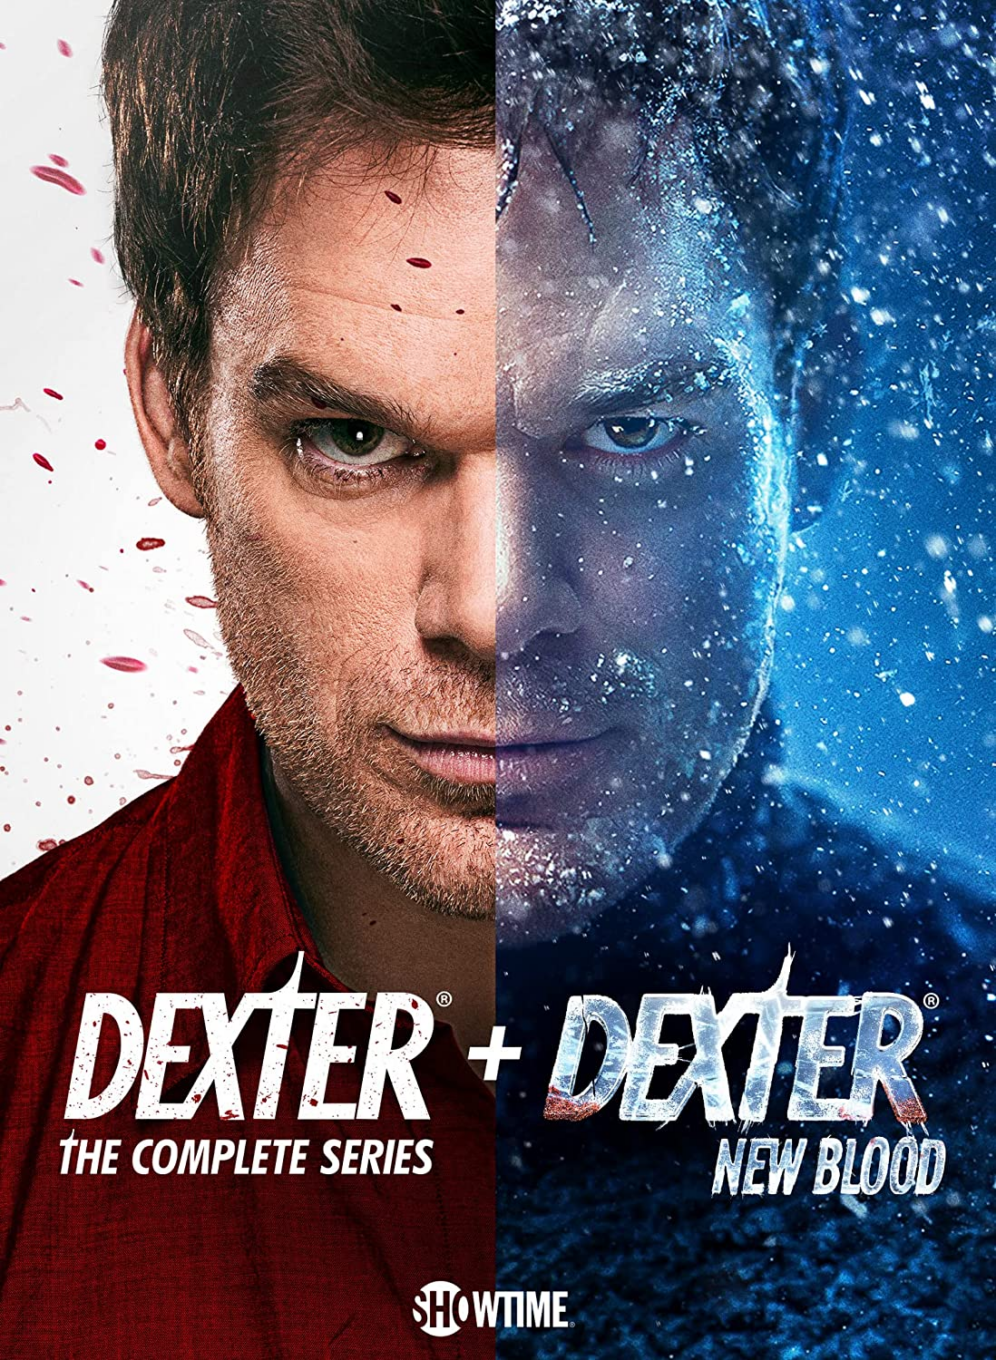 Blu-ray Review: Dexter: The Complete Series + Dexter: New Blood